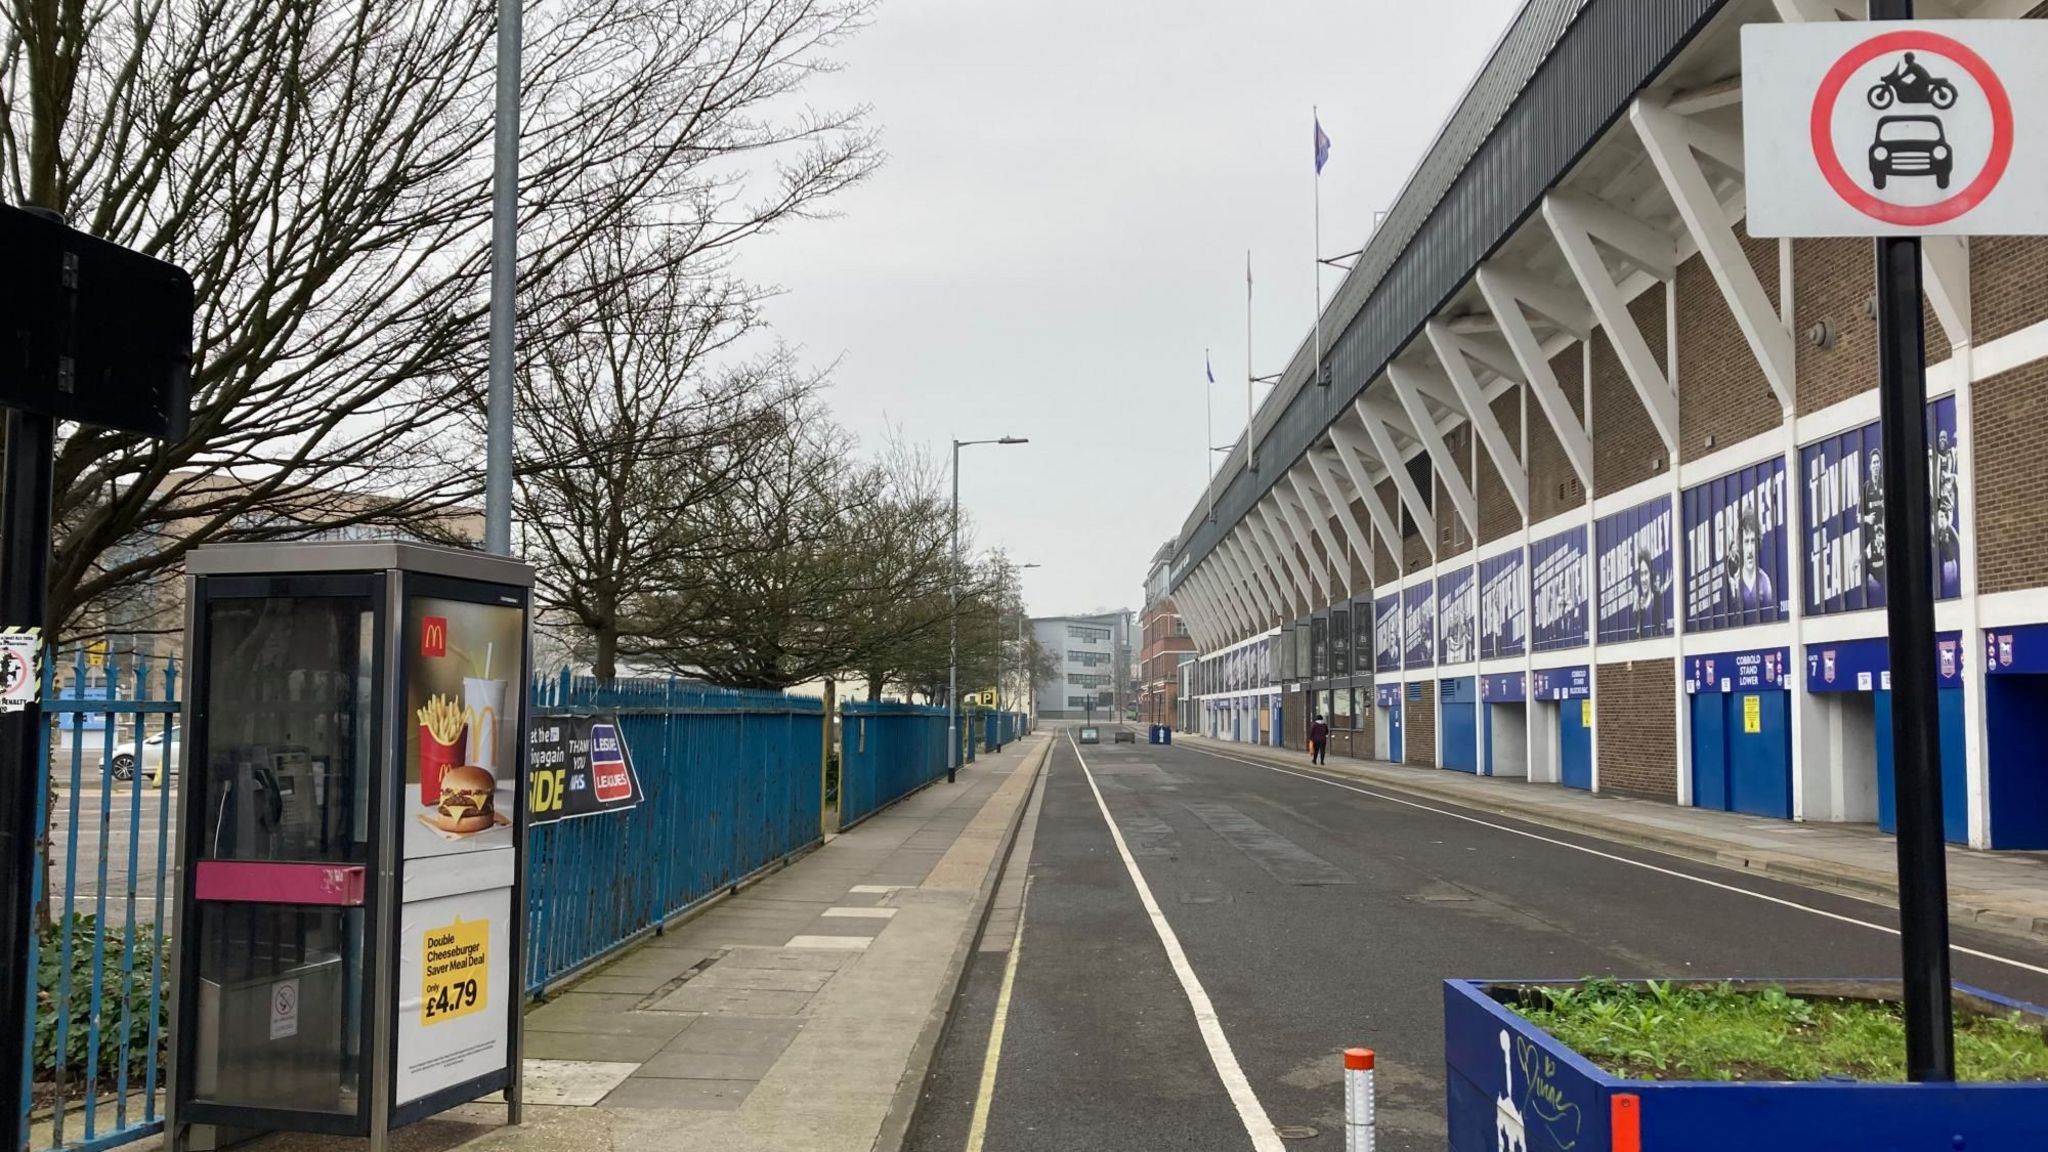 Portman Road in Ipswich showing the exterior of the football stadium's Cobbold Stand